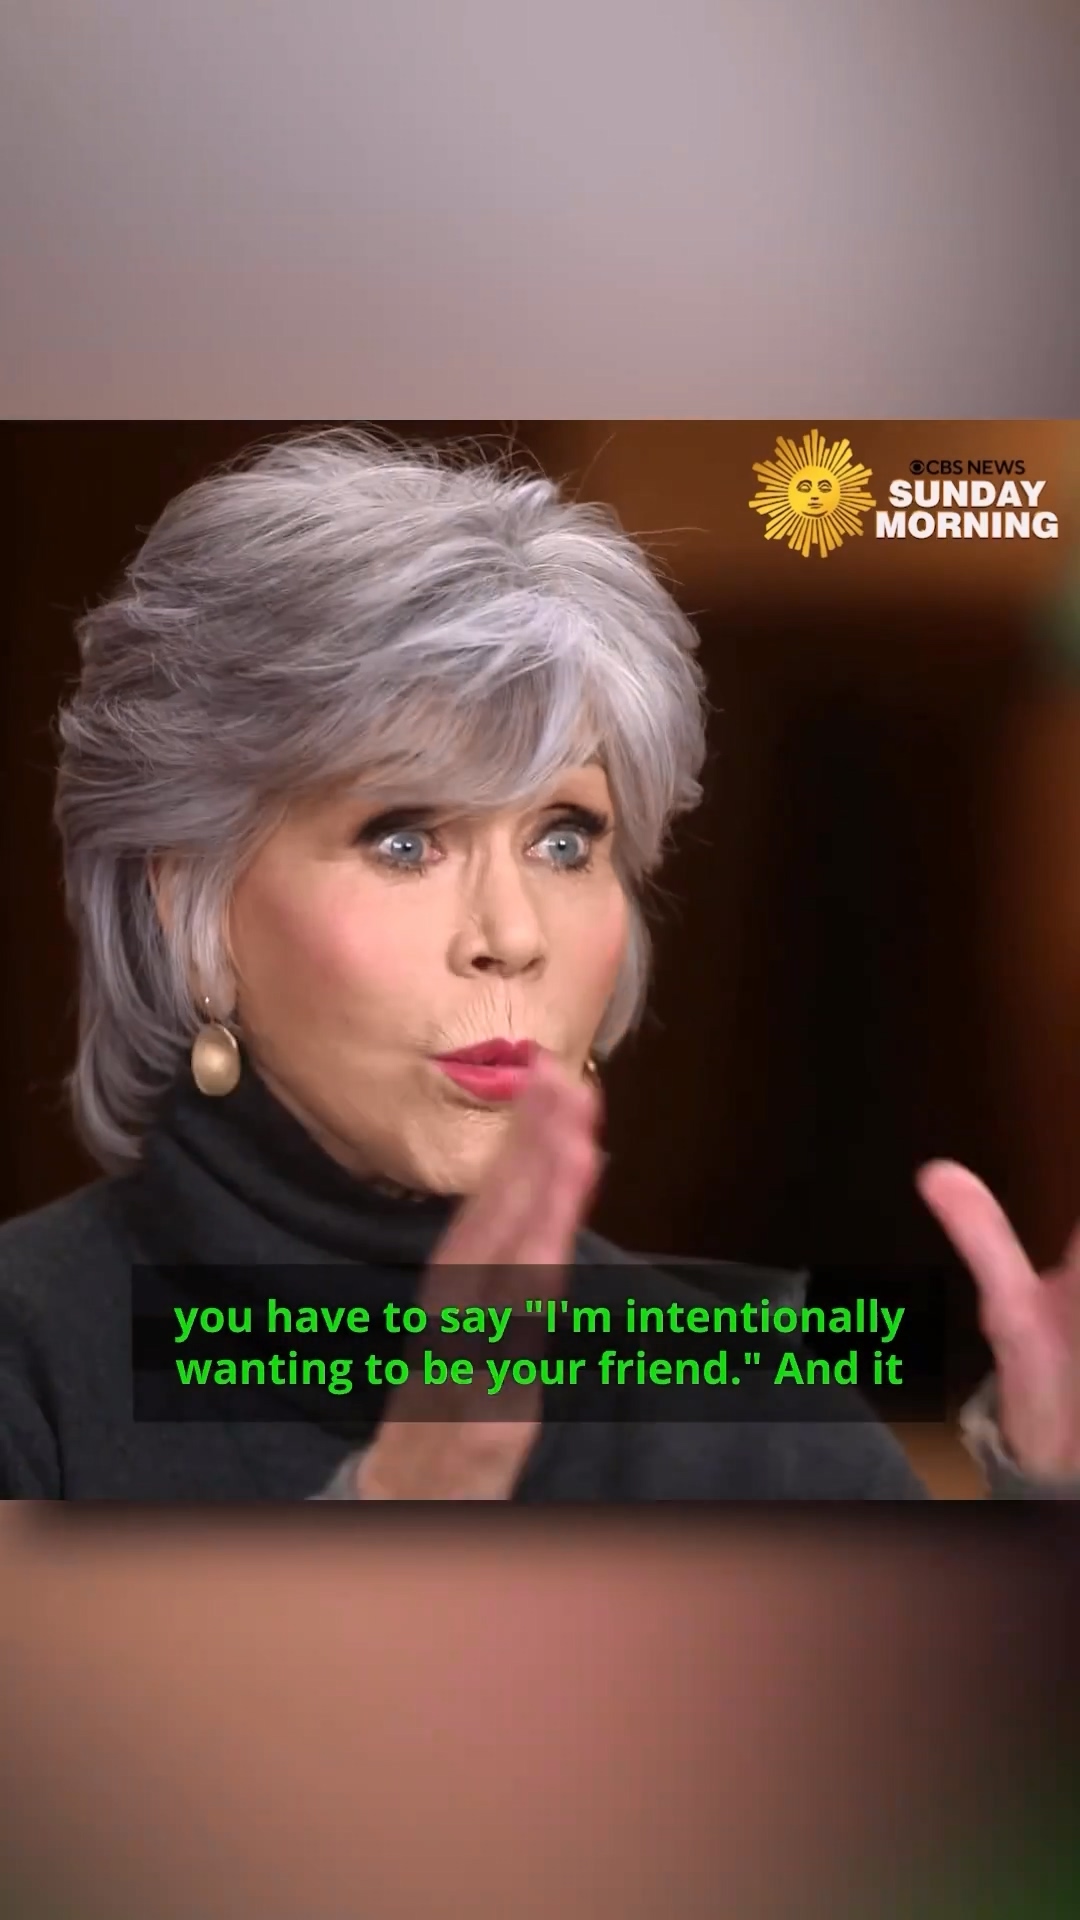 “You have to pursue people you want to be friends with.”@80forbrady actor @janefonda explains how she sought friendships with Sa_20230314_134849.511.jpg